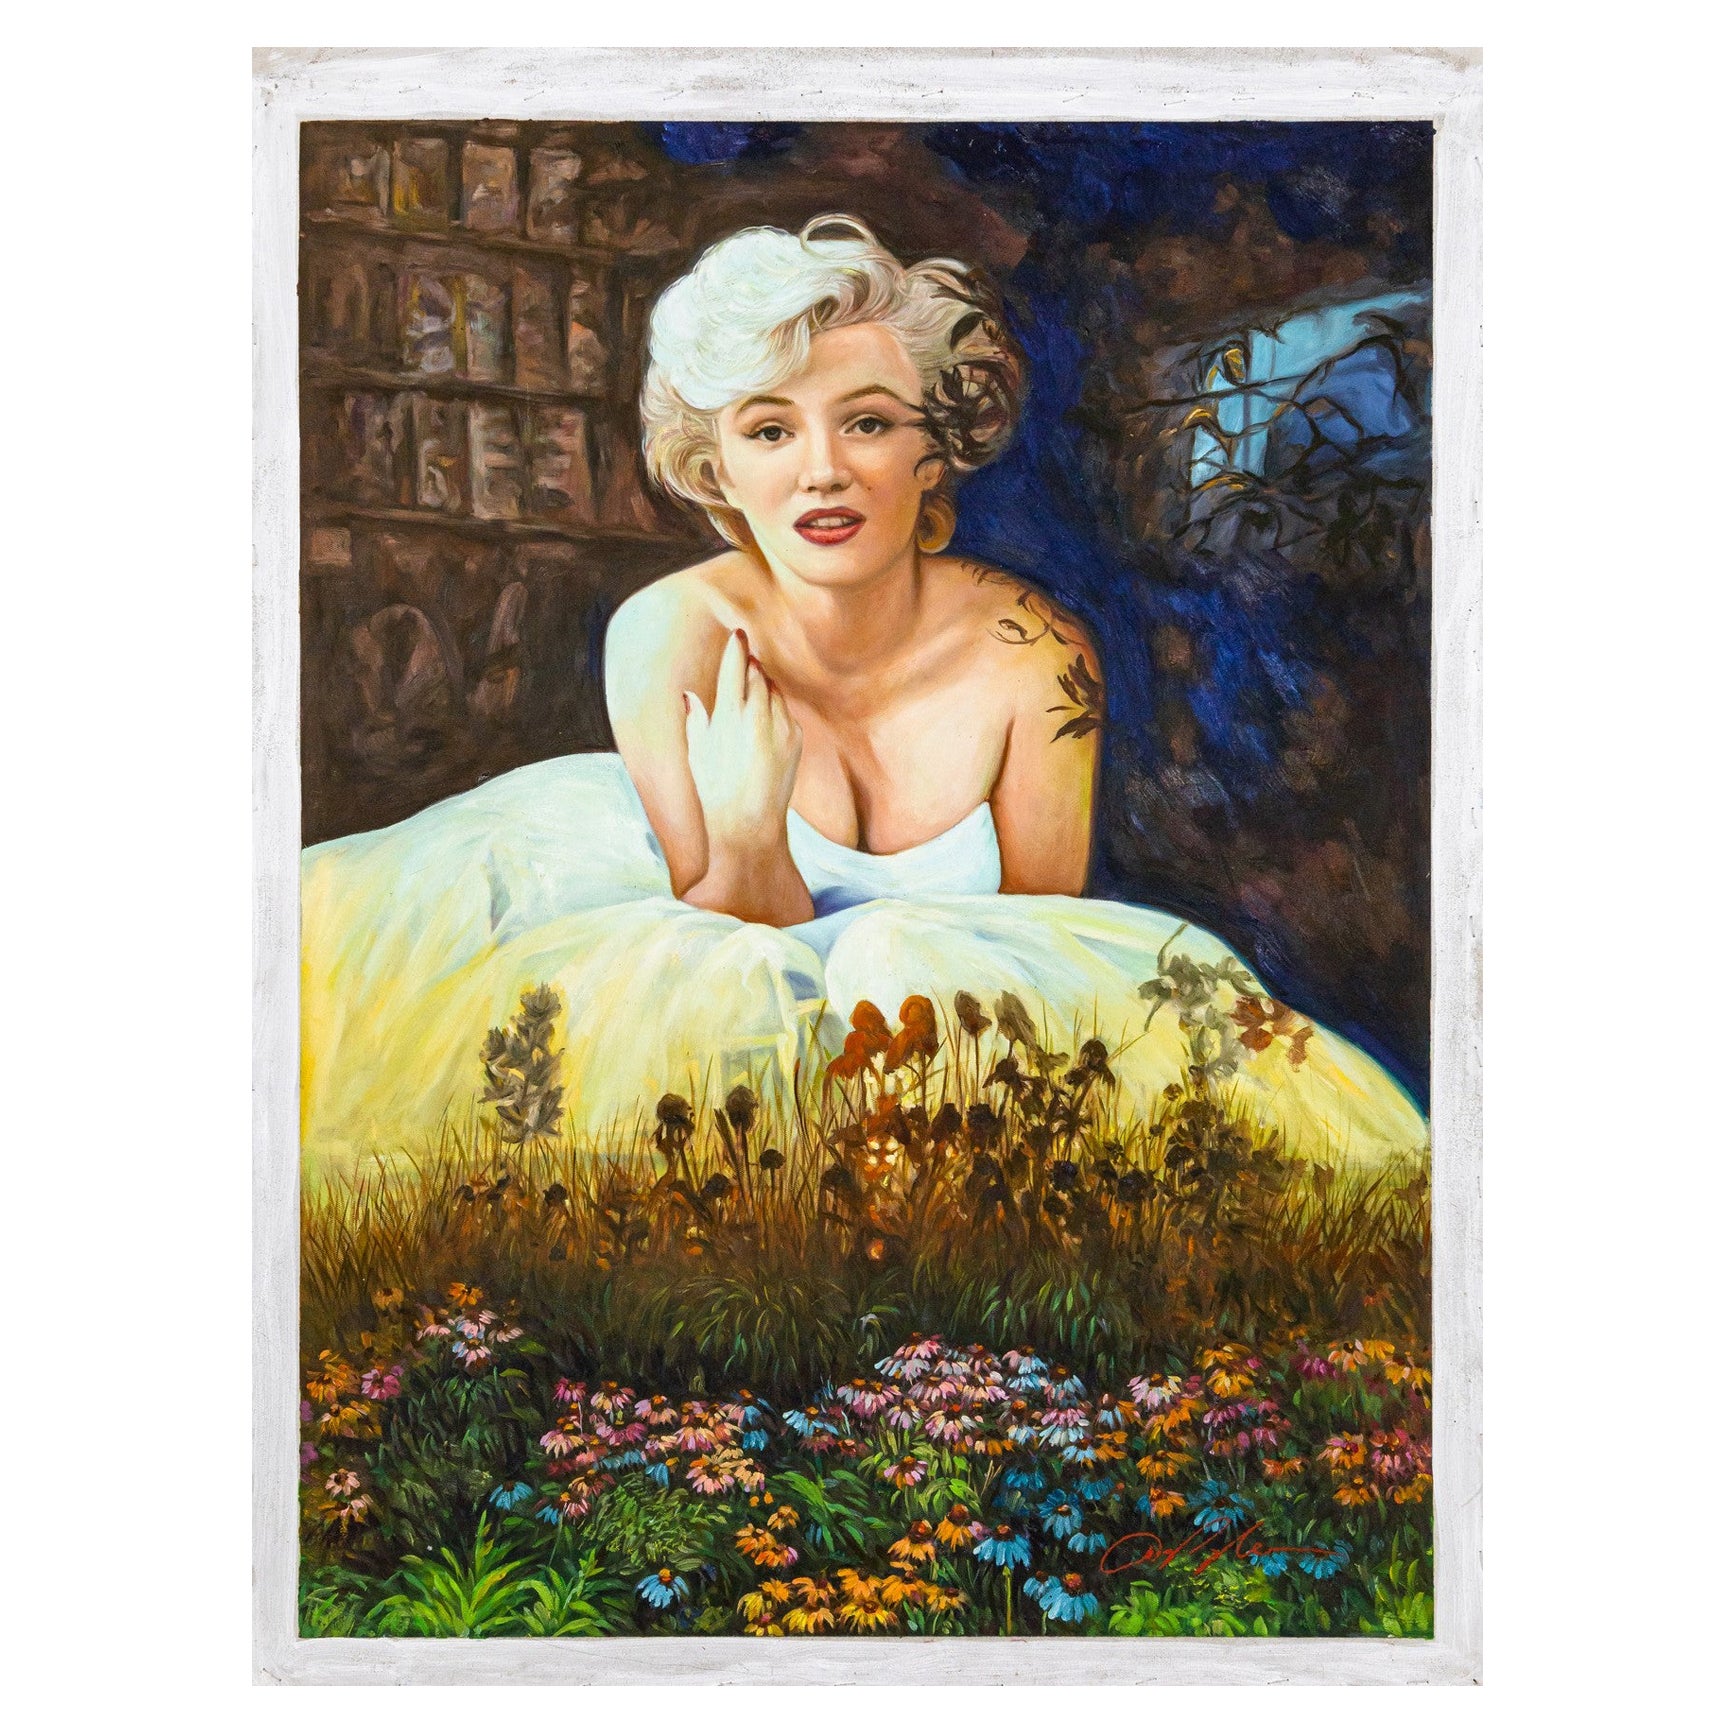 Dominic Pangborn Marilyn in Nature Signed Mixed-Media Acrylic Painting on Canvas